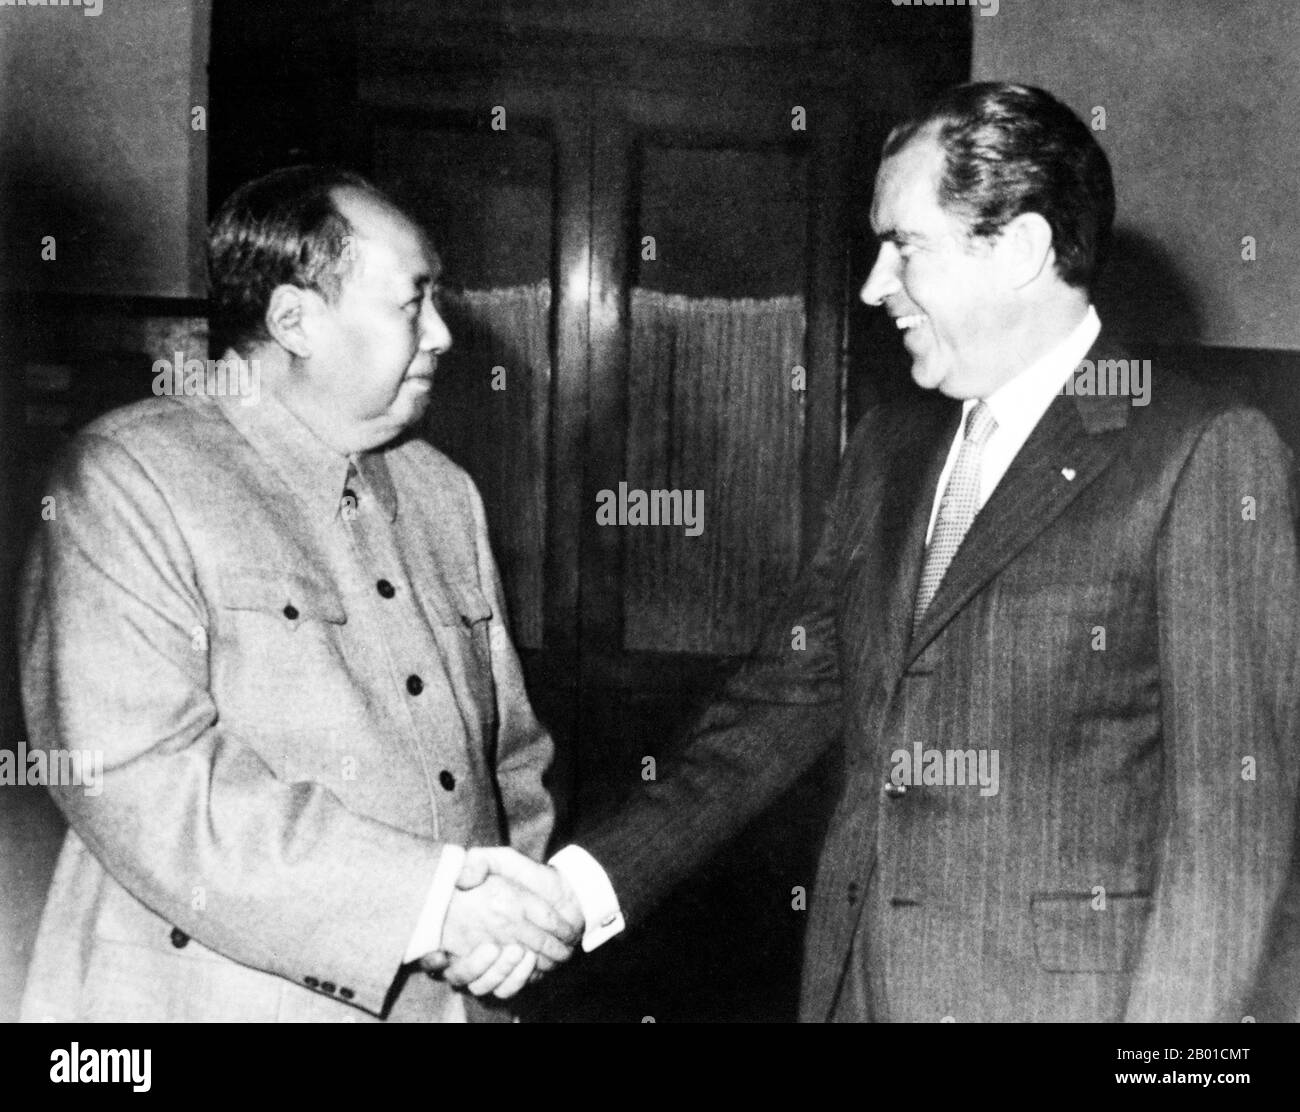 China/USA: Chairman Mao Zedong (26 December 1893 - 9 September 1976) shakes hands with President Richard Nixon (9 January 1913 - 22 April 1994), Beijing, 21 February 1972.  U.S. President Richard Nixon's 1972 visit to China was an important step in formally normalising relations between the United States and the People's Republic of China.  Between February 21-28 1972, Nixon traveled to Beijing, Hangzhou and Shanghai. Almost as soon as the president arrived in the Chinese capital he was summoned for a quick meeting with Chairman Mao who, unknown to the Americans, had been ill for days. Stock Photo